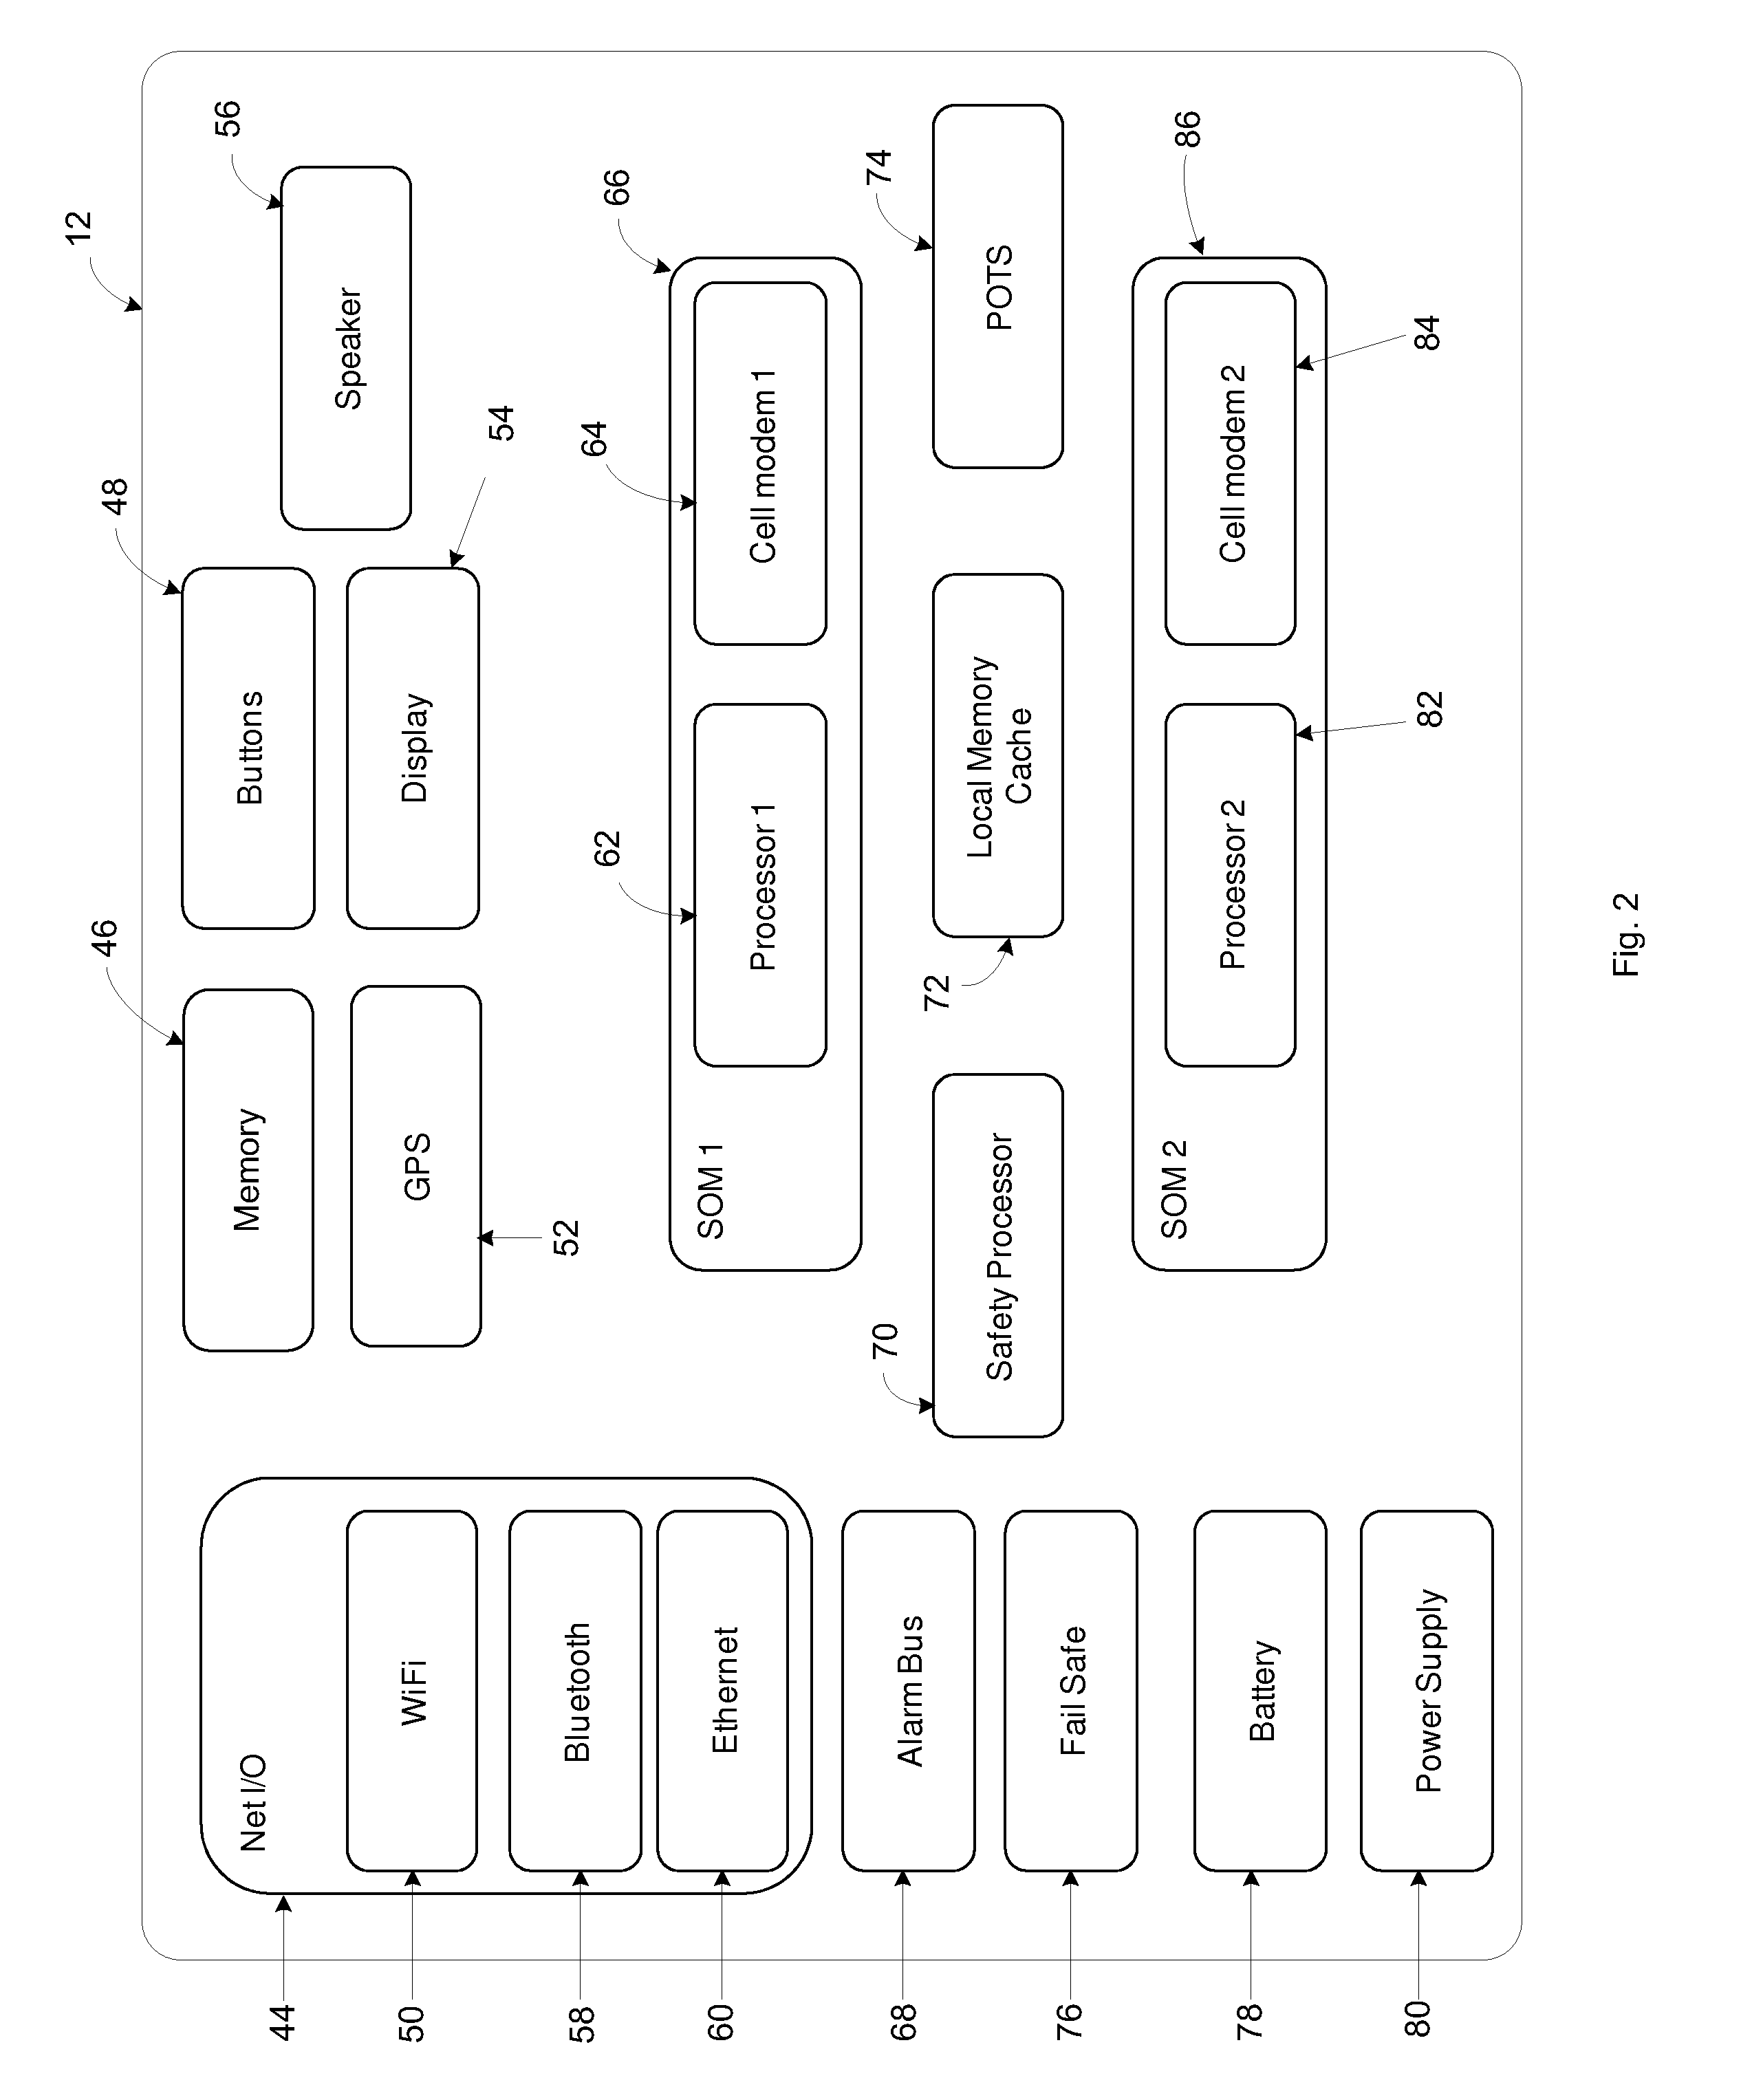 System, Method, and Apparatus for Communicating Data